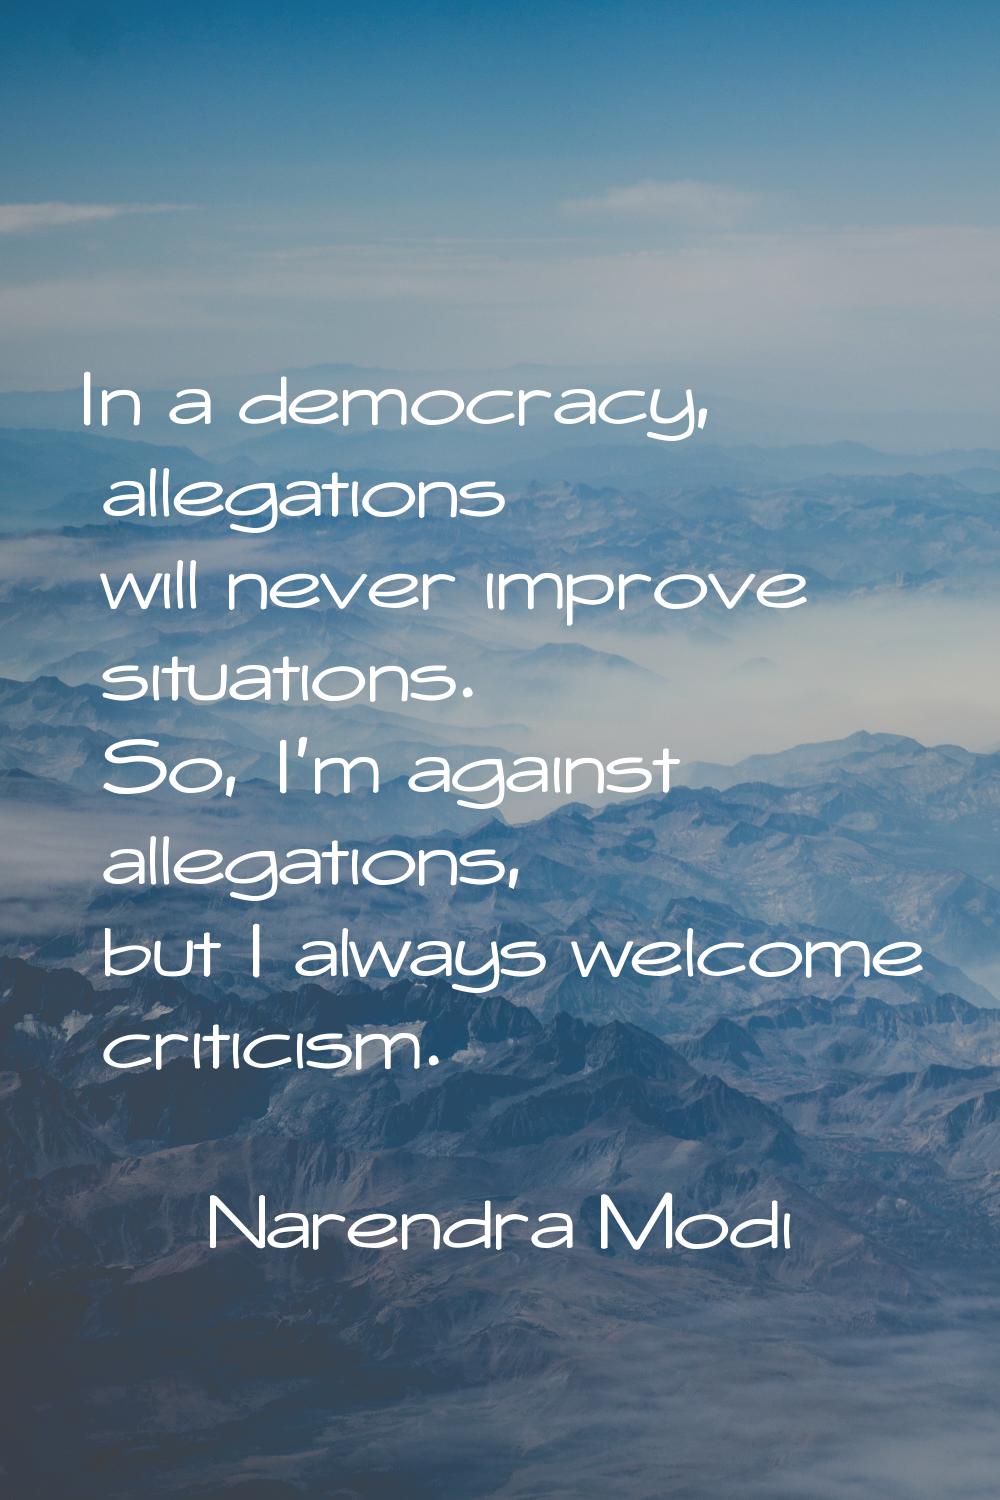 In a democracy, allegations will never improve situations. So, I'm against allegations, but I alway